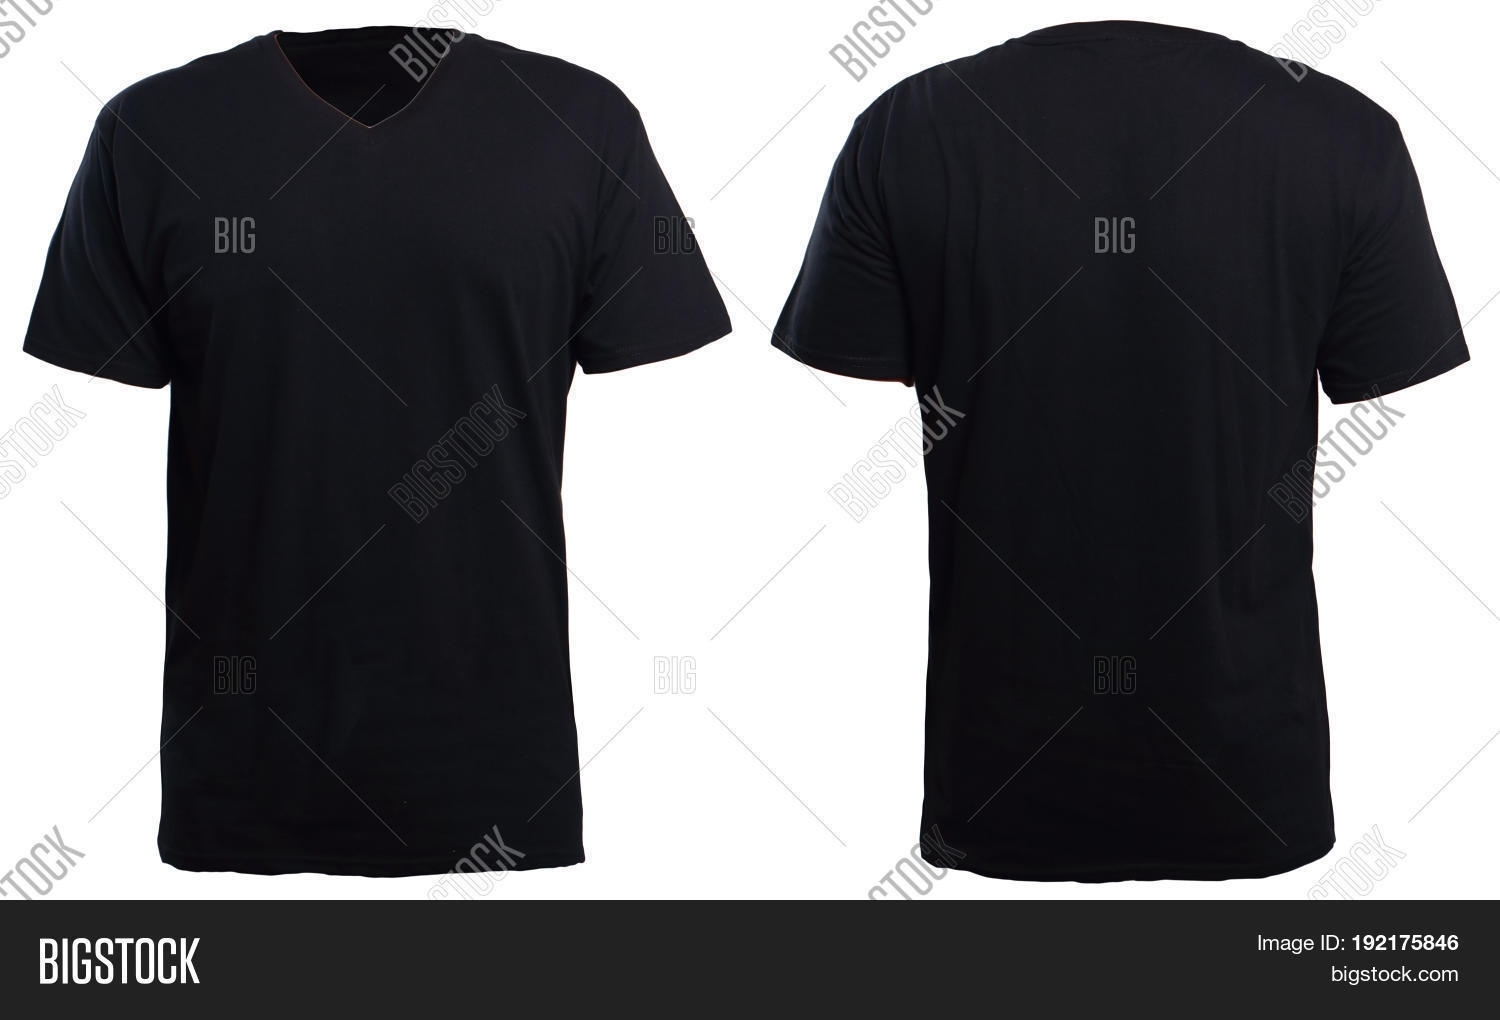 Blank V Neck Shirt Image & Photo (Free Trial) | Bigstock With Blank V Neck T Shirt Template